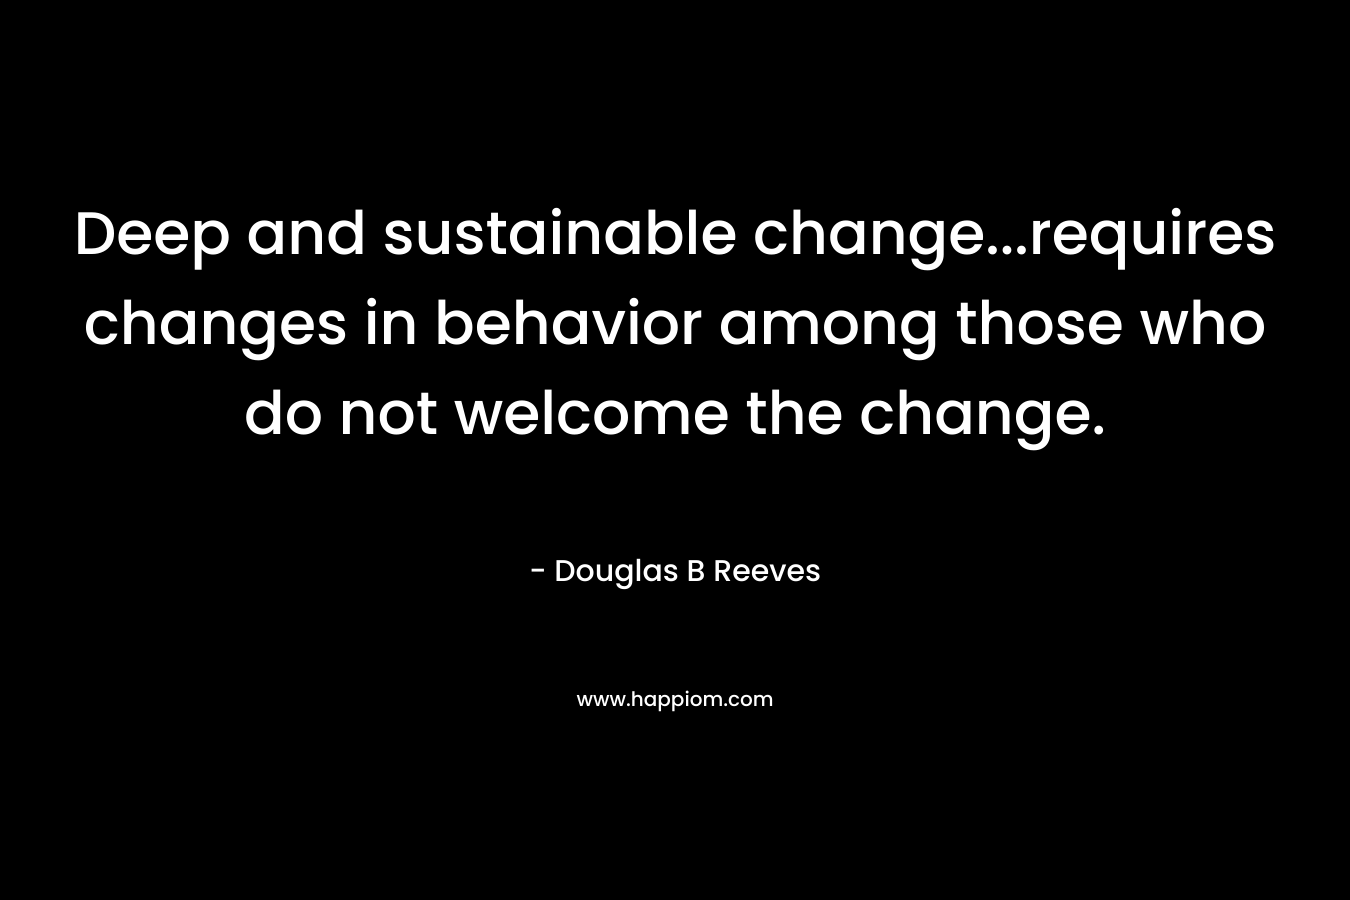 Deep and sustainable change…requires changes in behavior among those who do not welcome the change. – Douglas B Reeves